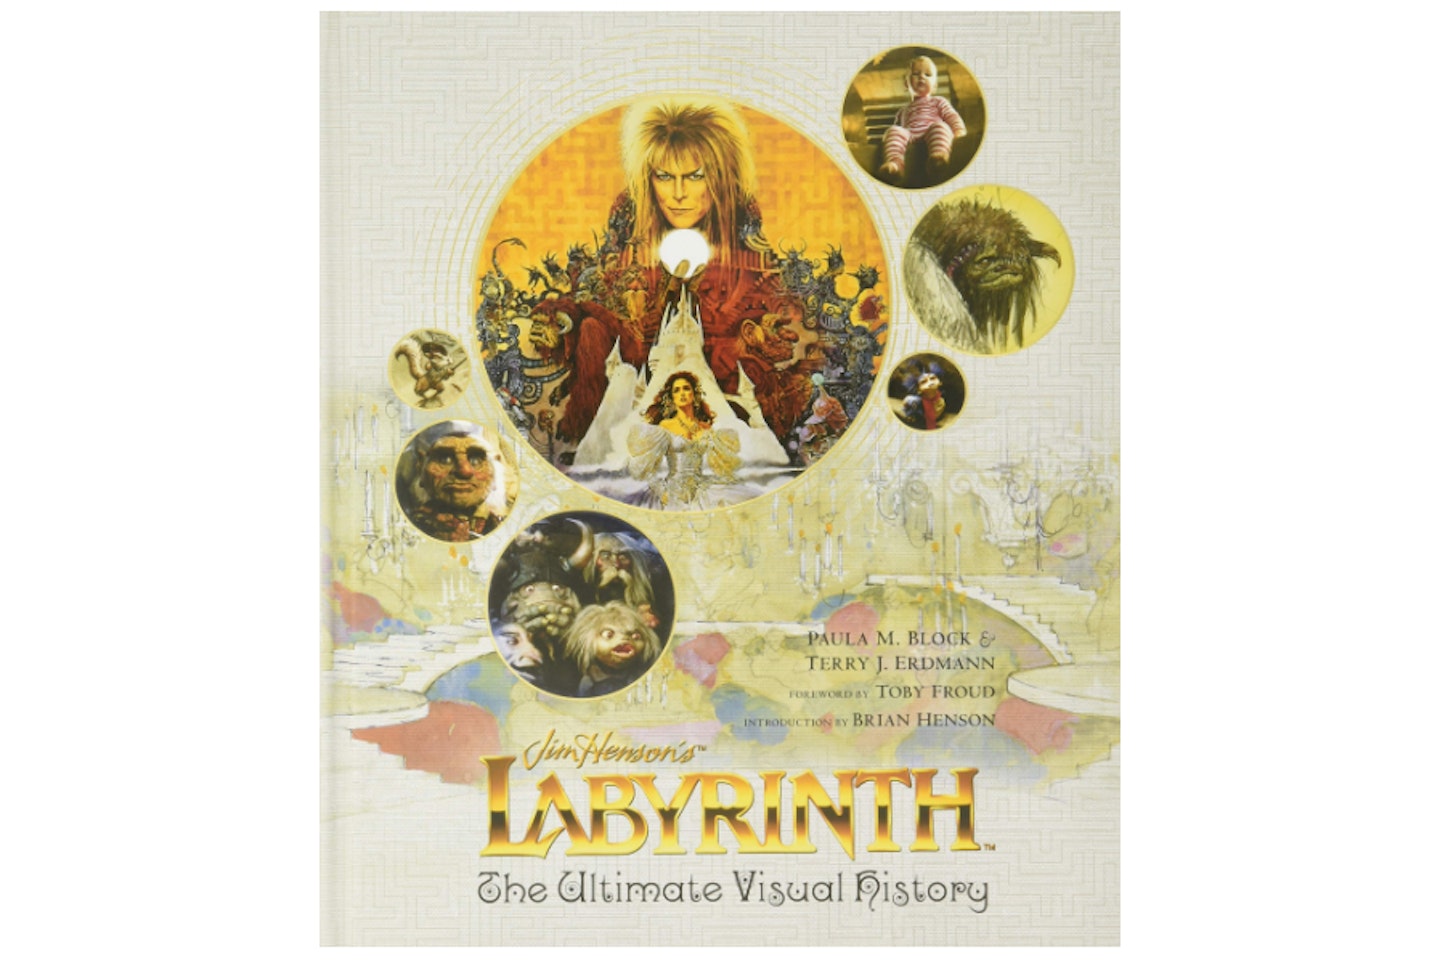 Labyrinth: The Ultimate Visual History, £20.96